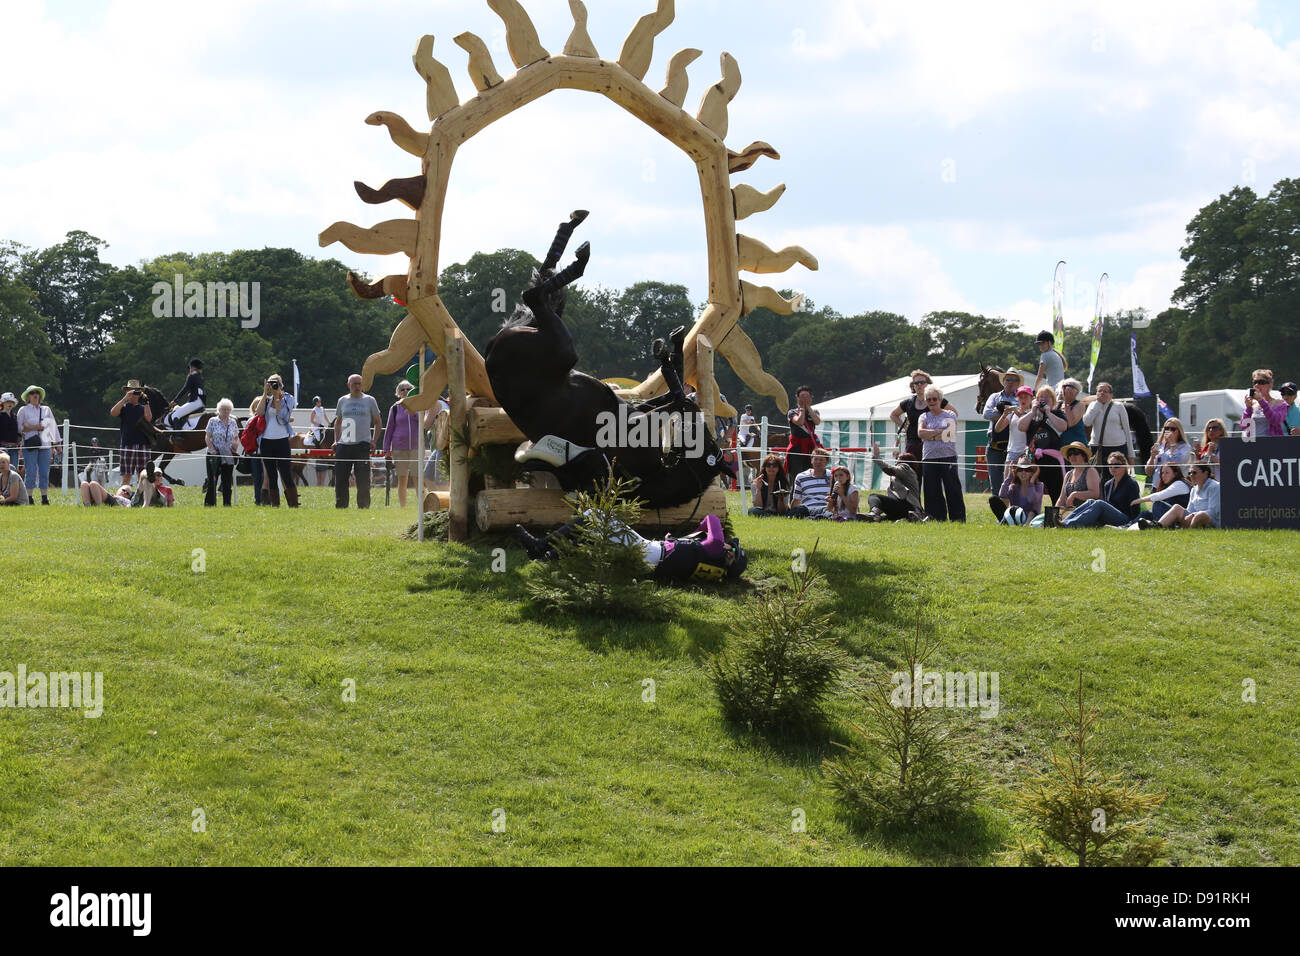 Leeds Bramham UK. 8th June 2013. Jolyse Clancey (GBR) riding On Stage II is involved in a dramatic fall during the cross country event at the 40th Bramham horse trials, both horse and rider were not seriously injured. Credit: S D Schofield/Alamy Live News Stock Photo